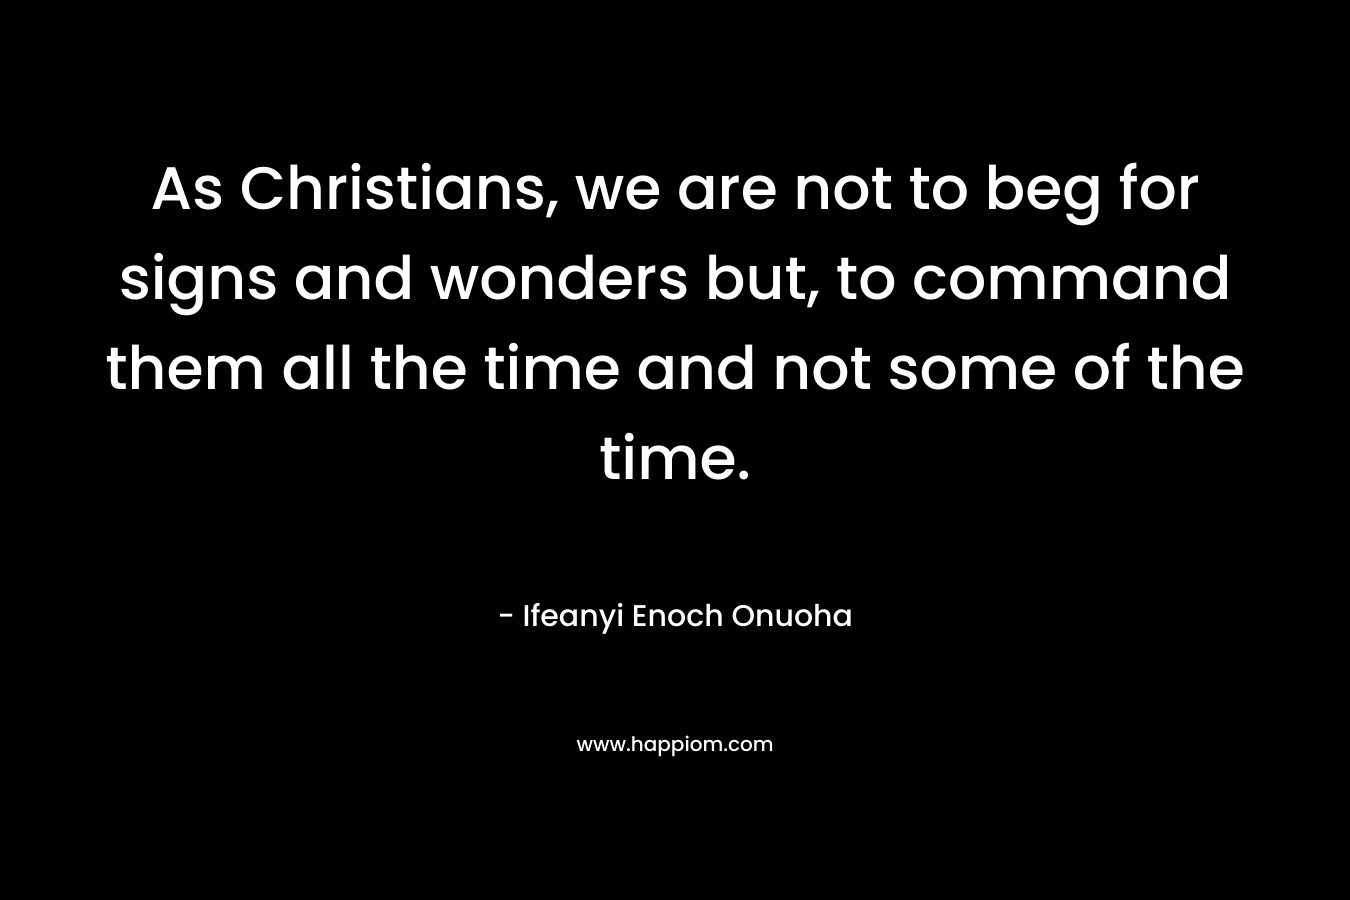 As Christians, we are not to beg for signs and wonders but, to command them all the time and not some of the time. – Ifeanyi Enoch Onuoha